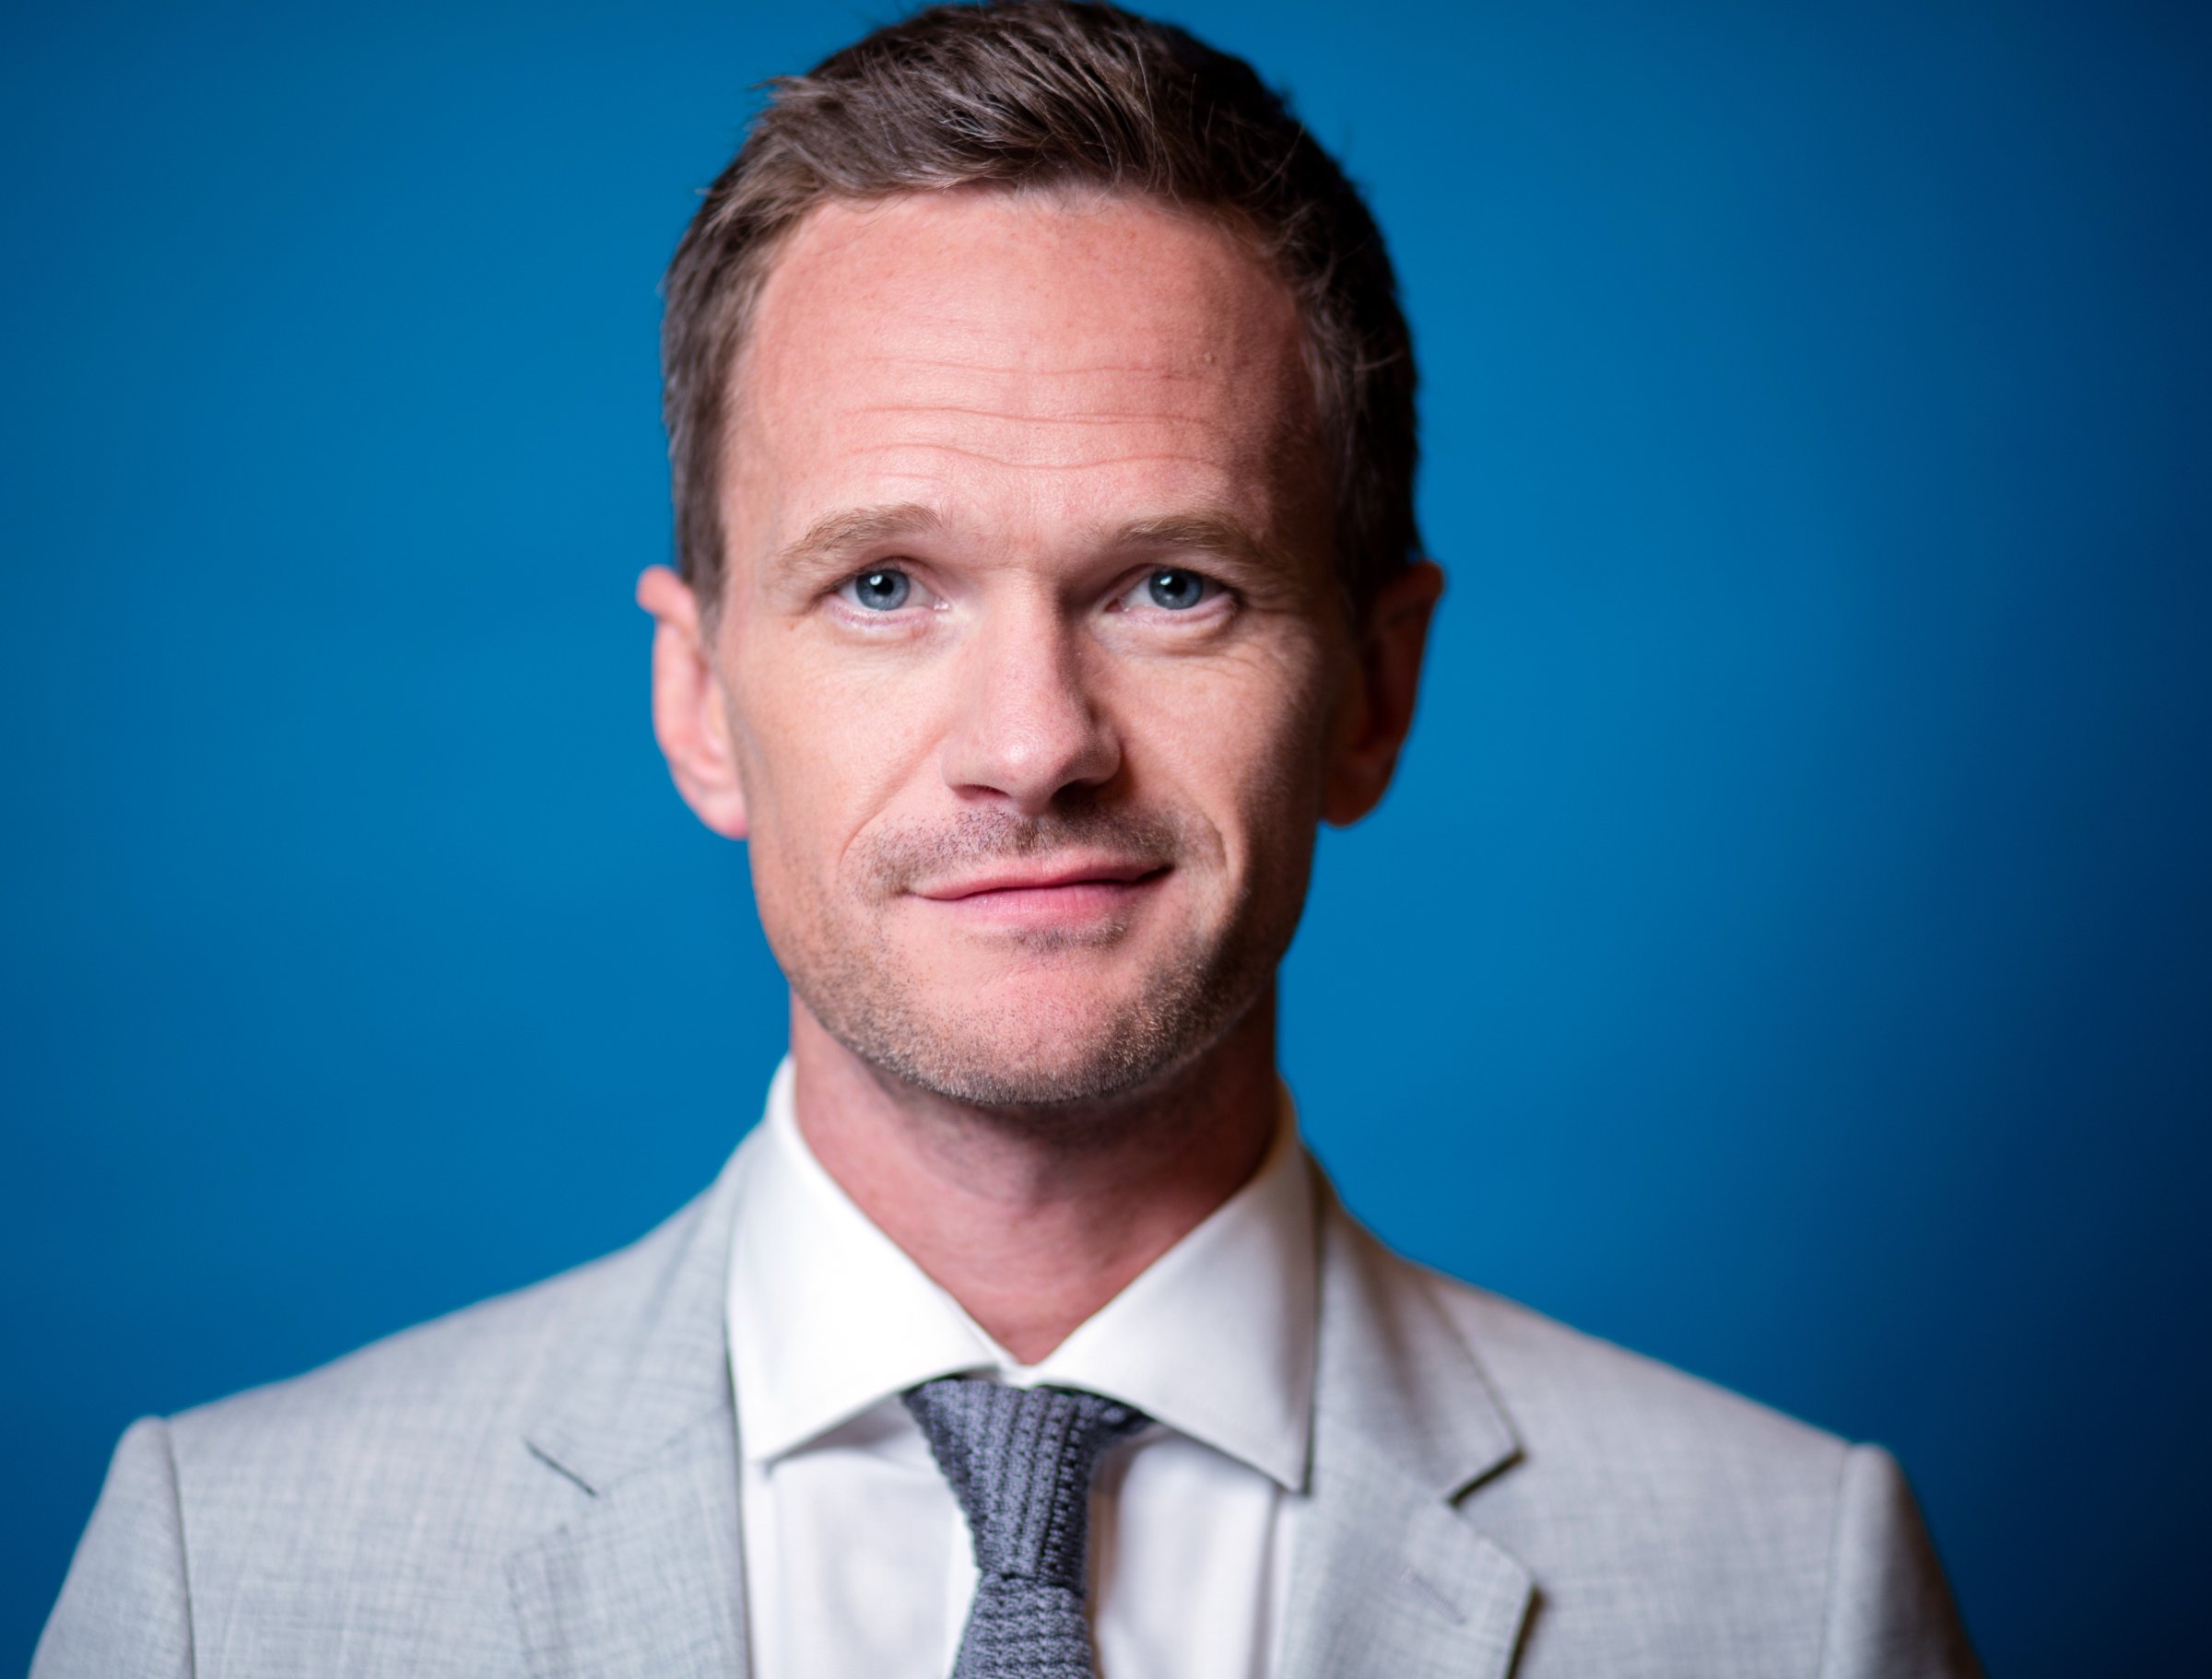 Neil Patrick Harris at the 2015 Summer TCA Tour in Beverly Hills, Calif. on Aug. 13, 2015.